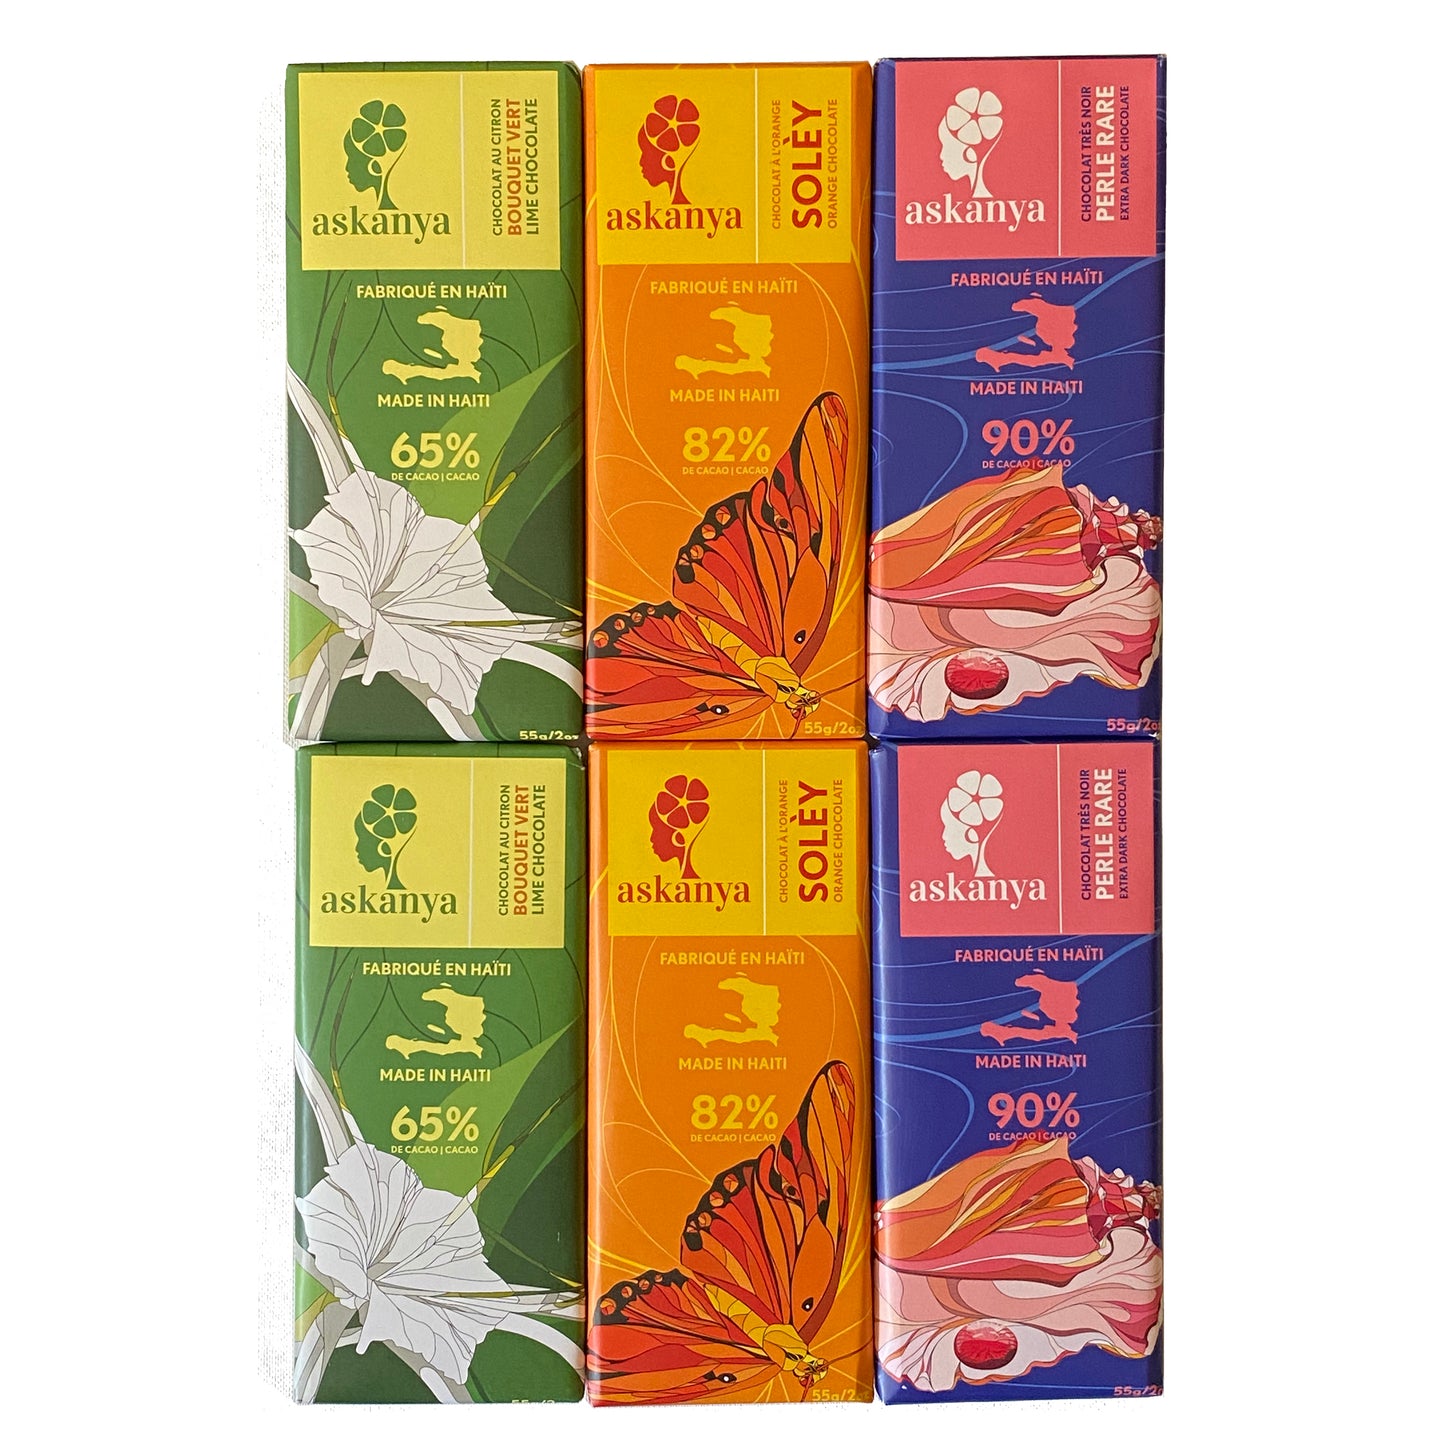 6 Vegan Chocolates Bars in 3 Flavors - 2 Bouquet Vert (Lime Chocolate - 65% Cacao), 2 Soley (Orange Chocolate - 82% Cacao) and Perle Rare (Extra Dark Chocolate - 90% Cacao). Each bar weighs 2 oz